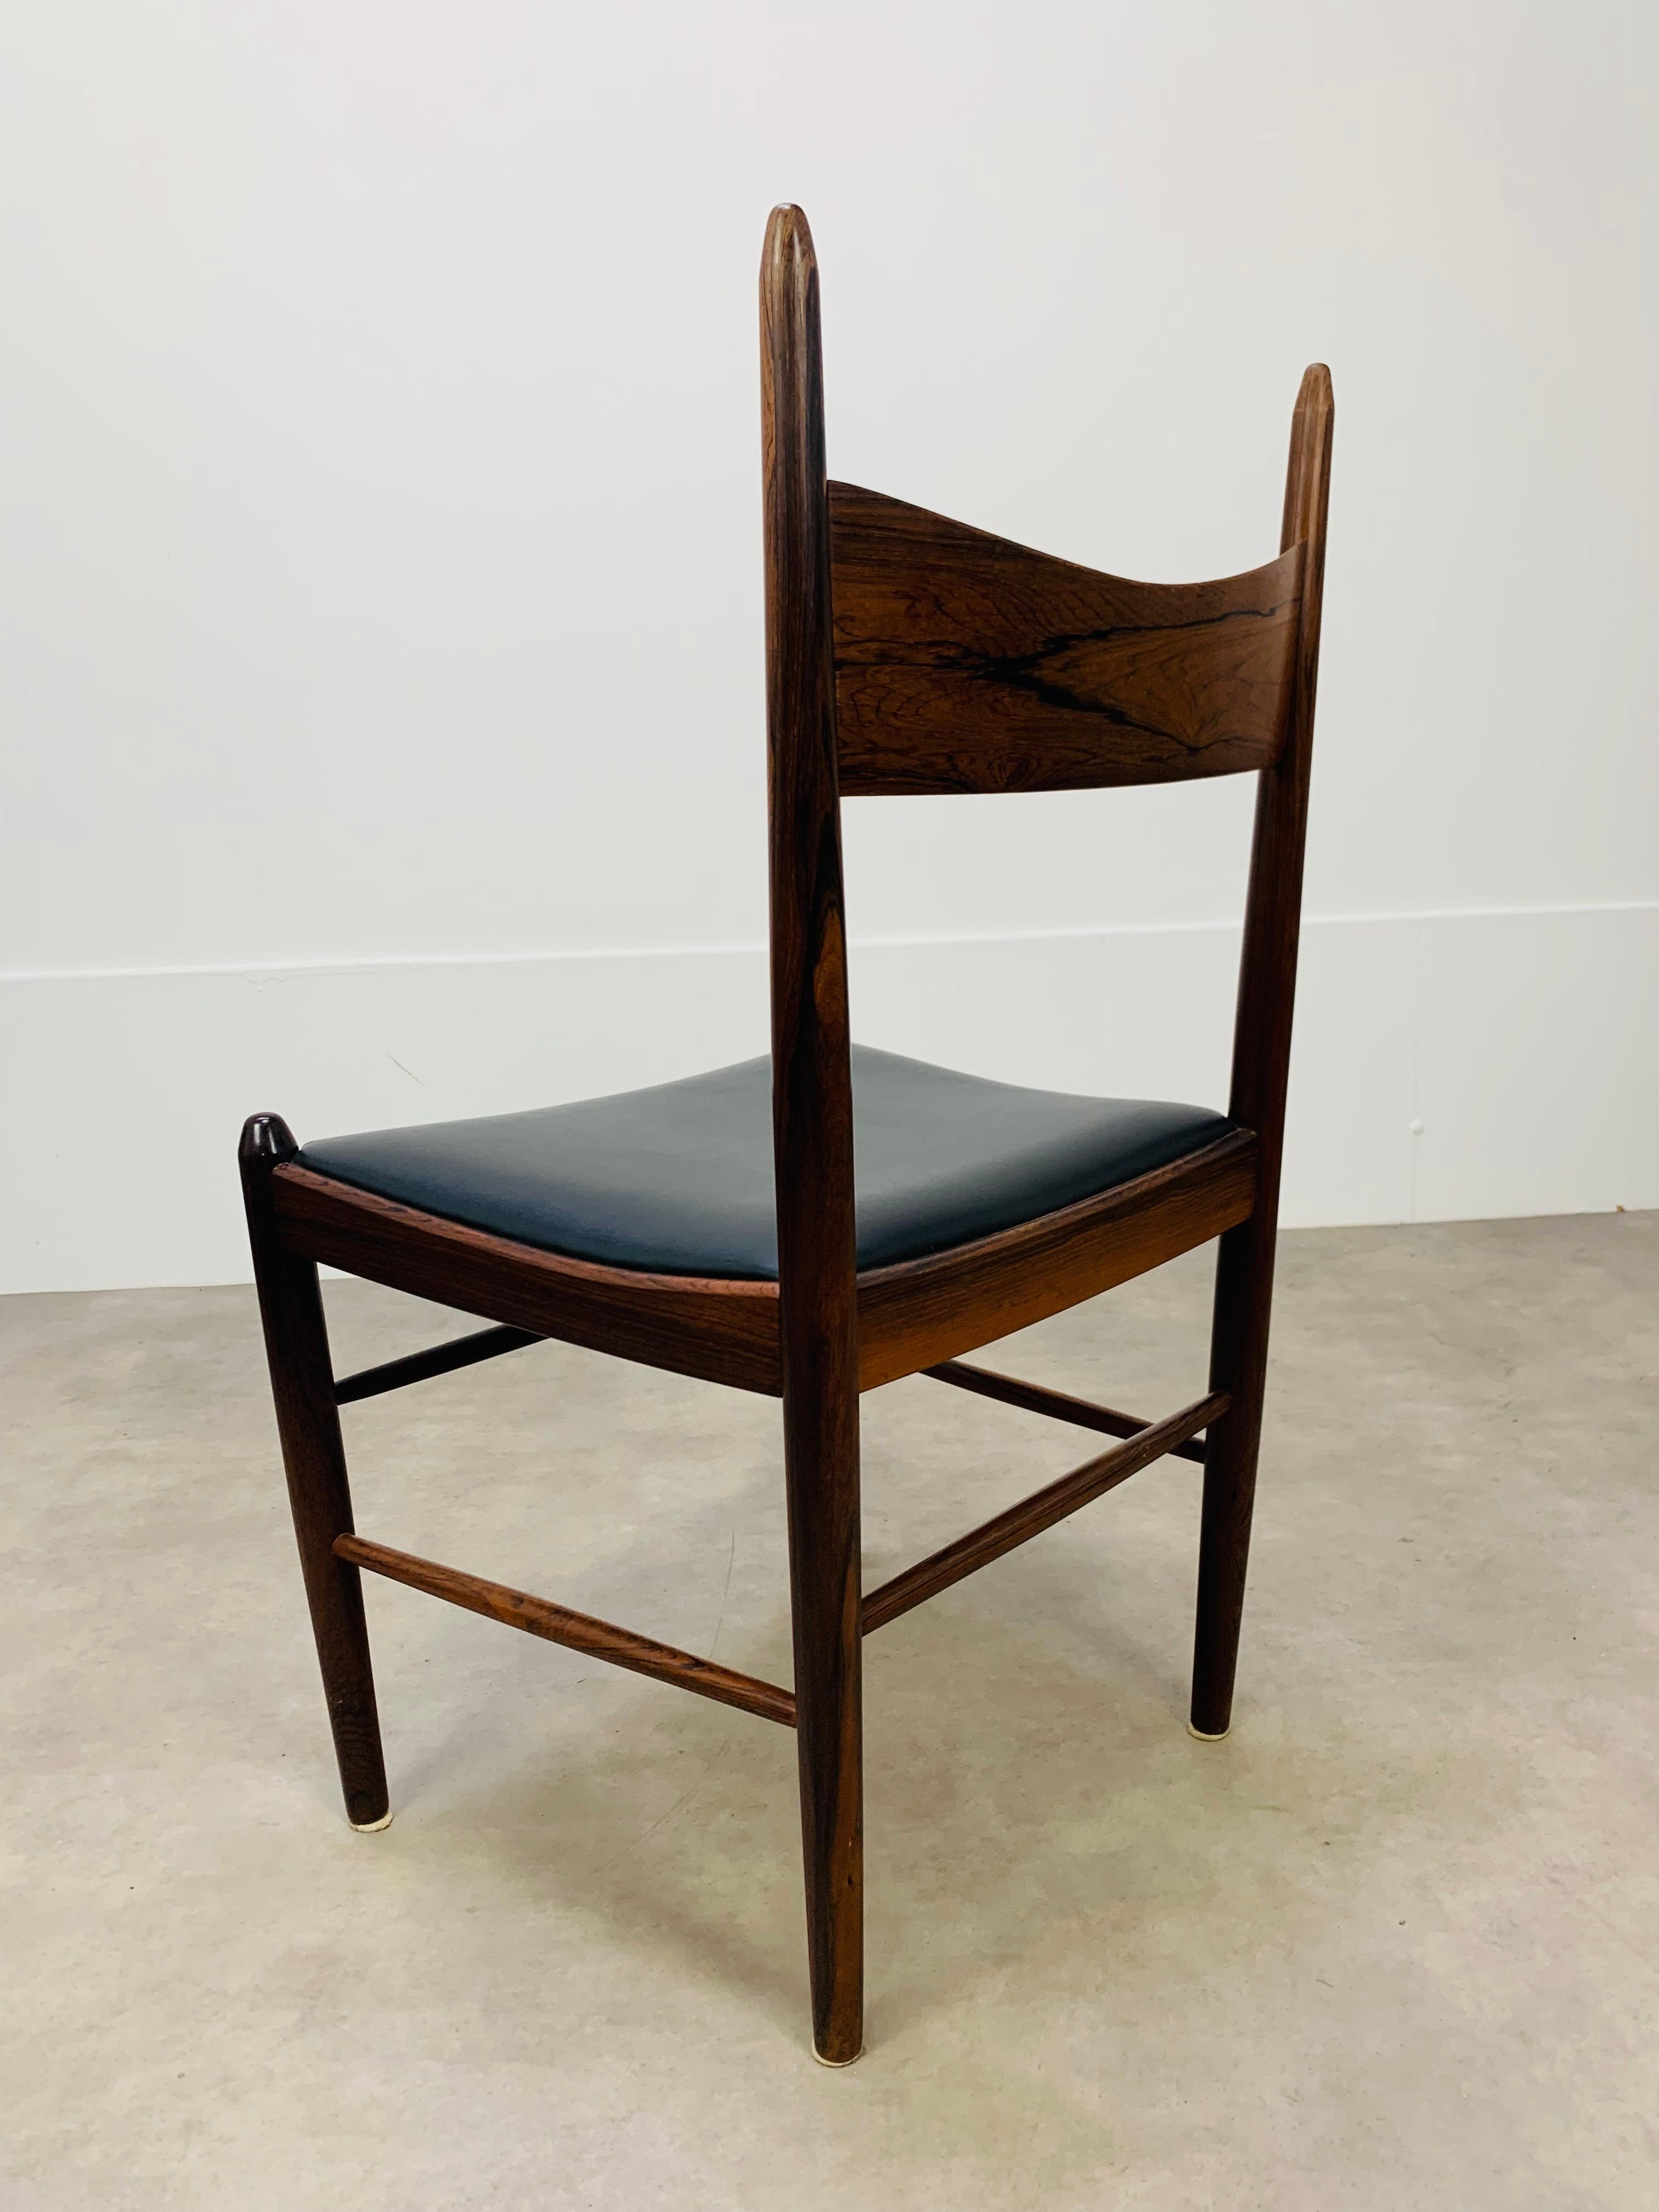 4 Scandinavian Rosewood Chairs by Vestervig Eriksen for Tomborg, 1960 For Sale 1